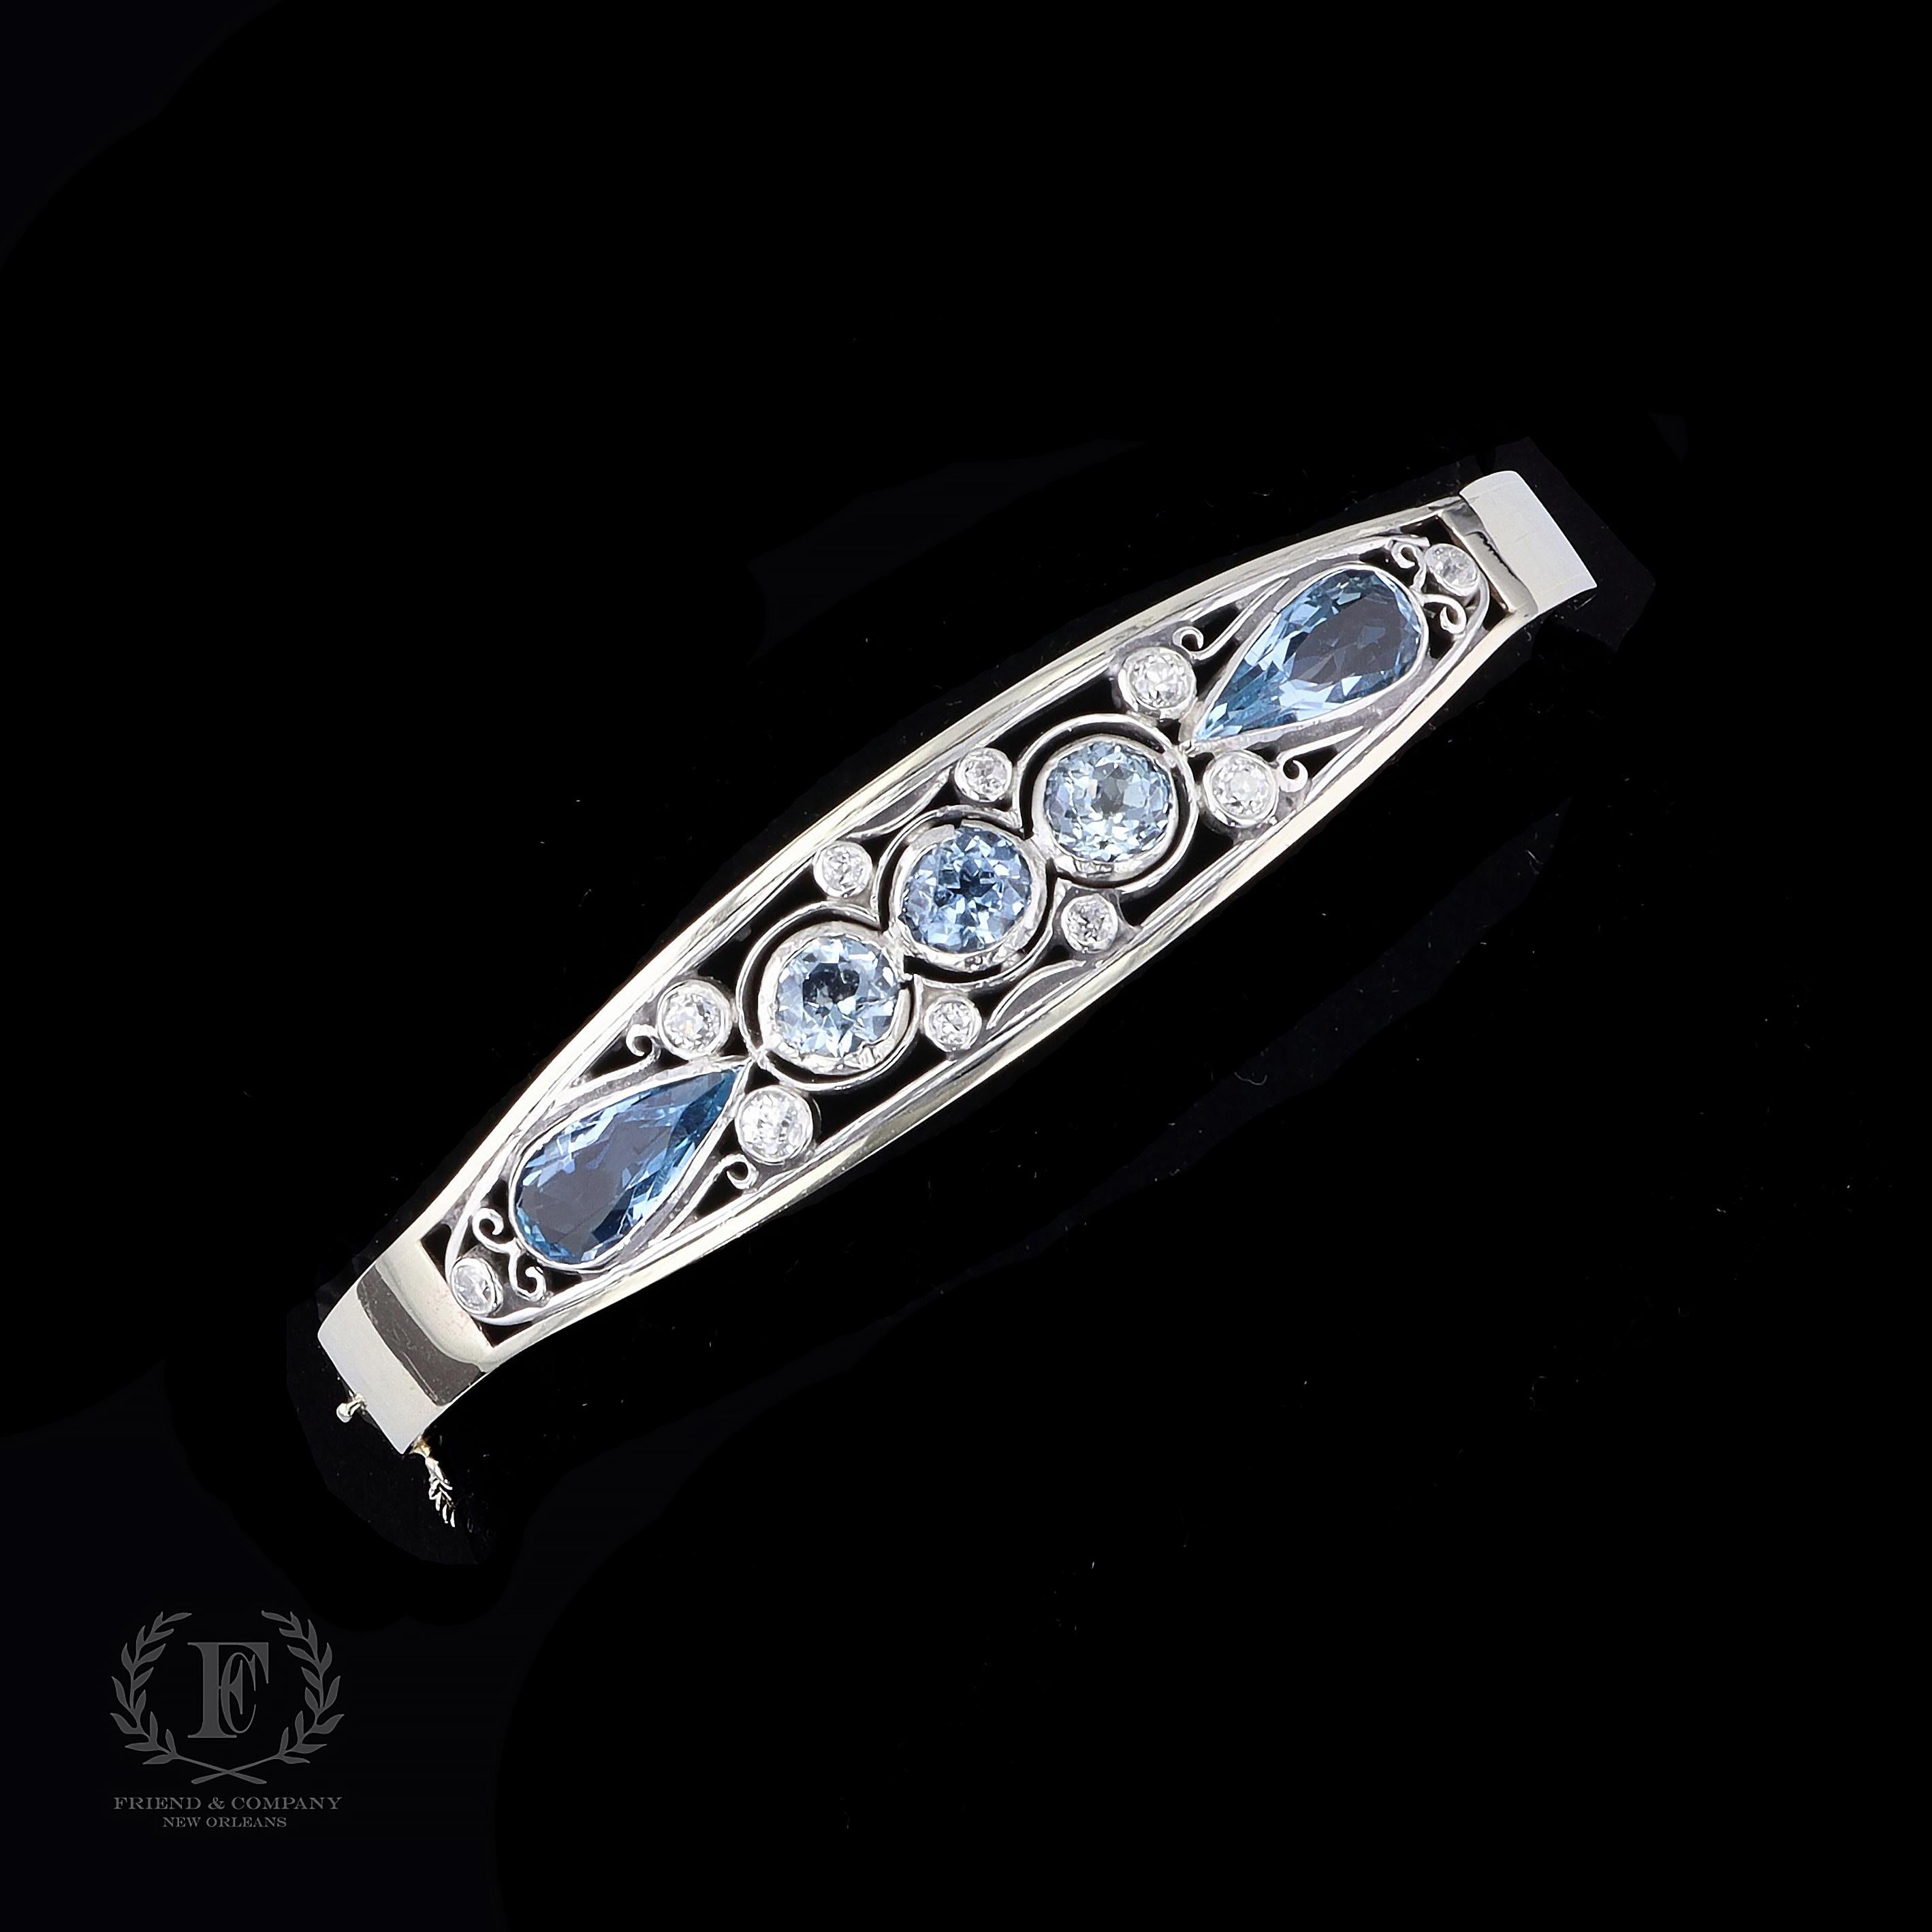 A 1950s treasure. This bangle bracelet is set with pear and round cut aquamarines and old mine cut diamonds that weigh approximately 7.00 carats and 0.40 carats respectively. The bangle measures 13 millimeters in width at the widest base and will